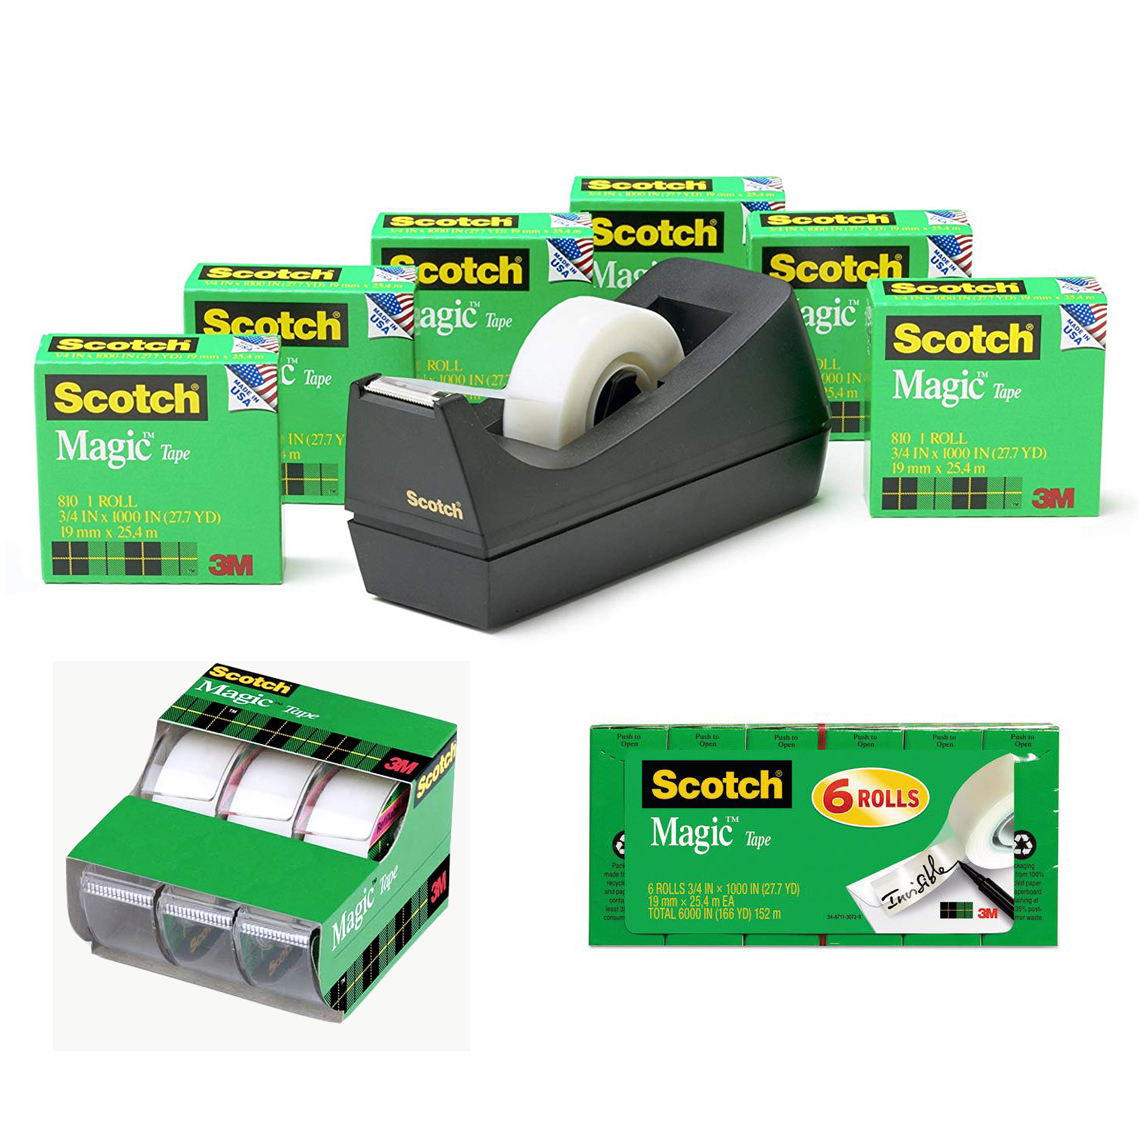 1 Dispenser Boxed Numerous Applications Cuts Cleanly Scotch Brand Magic Tape with Black Dispenser Standard Width 6 Rolls 810K3 3/4 x 1000 Inches Matte Finish 